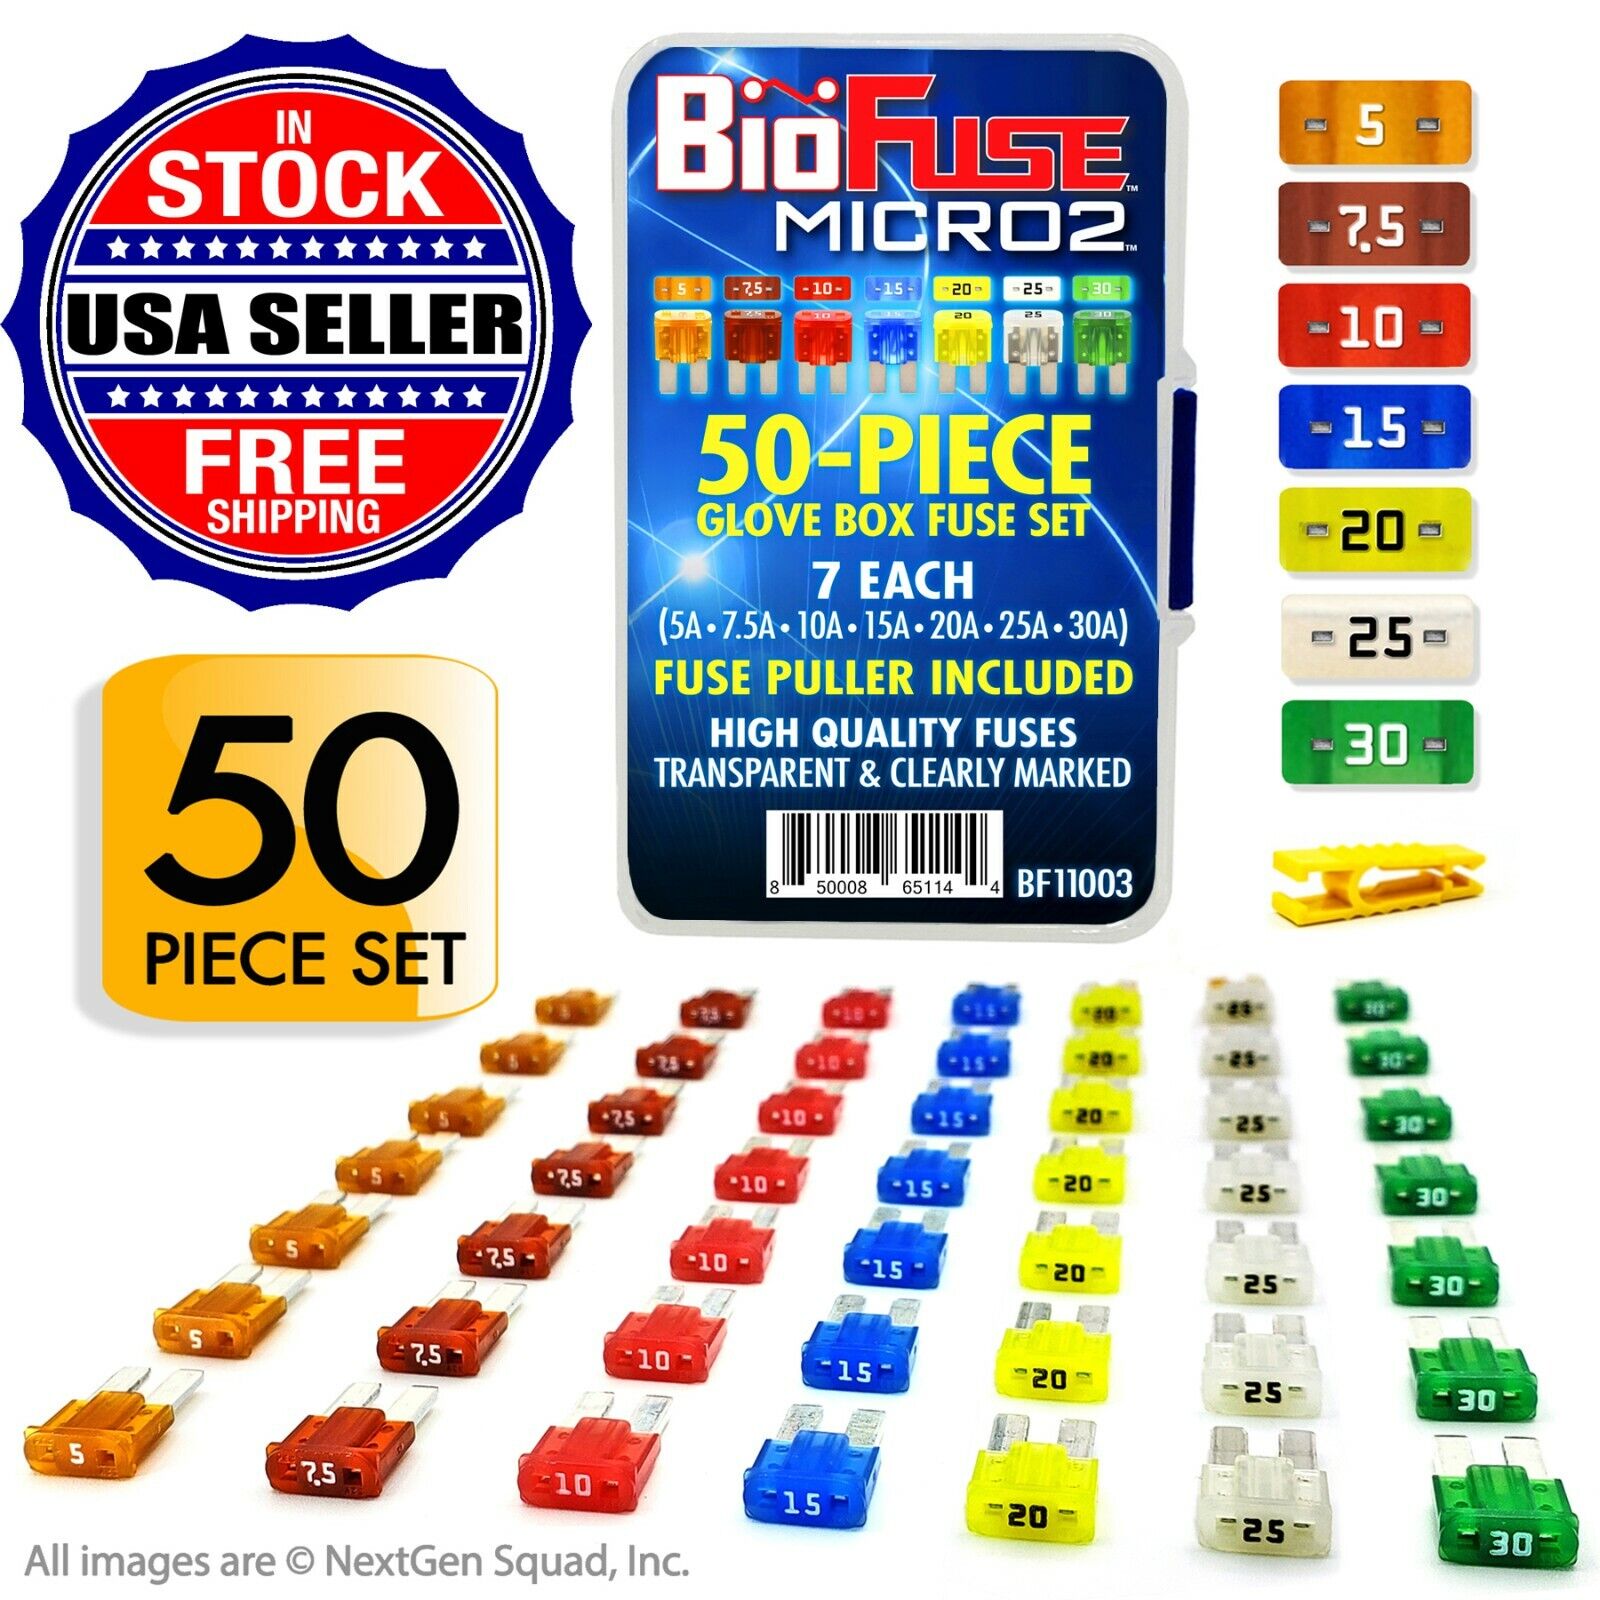 BioFuse® Micro2 50 Piece Assorted Fuse Pack *Set of 50 Blade Fuses + Fuse Puller